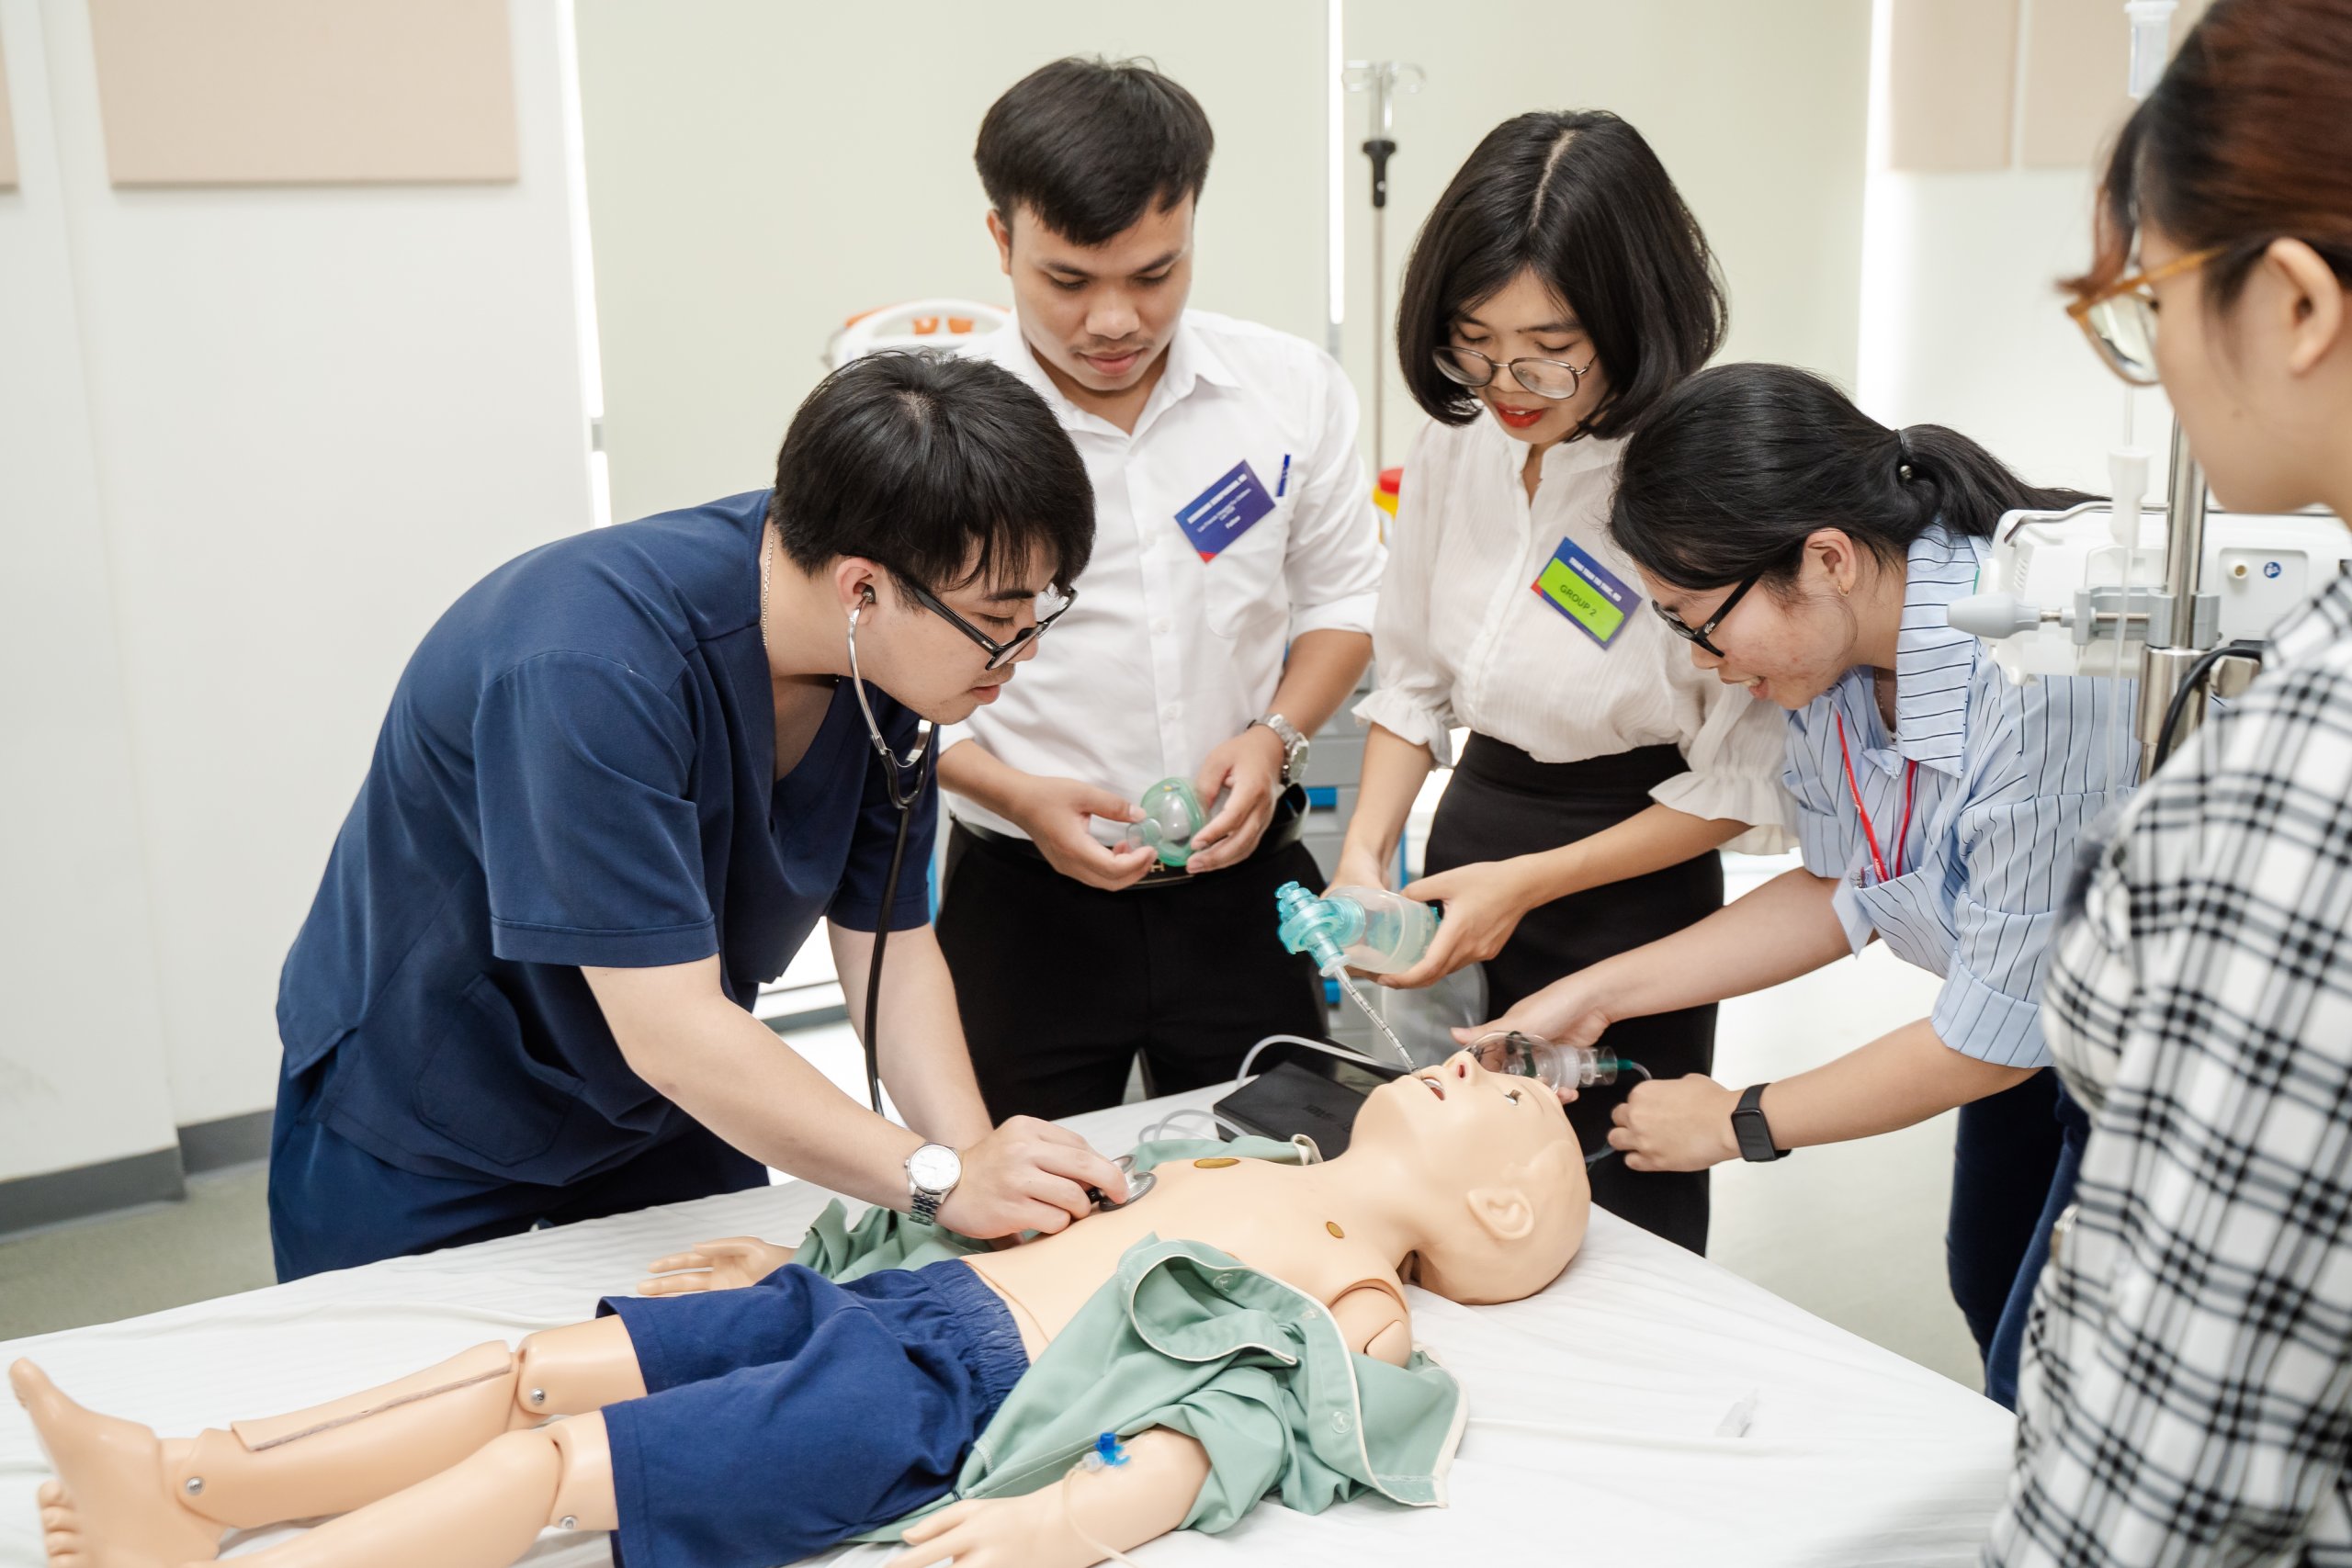 Fellows during the simulation training